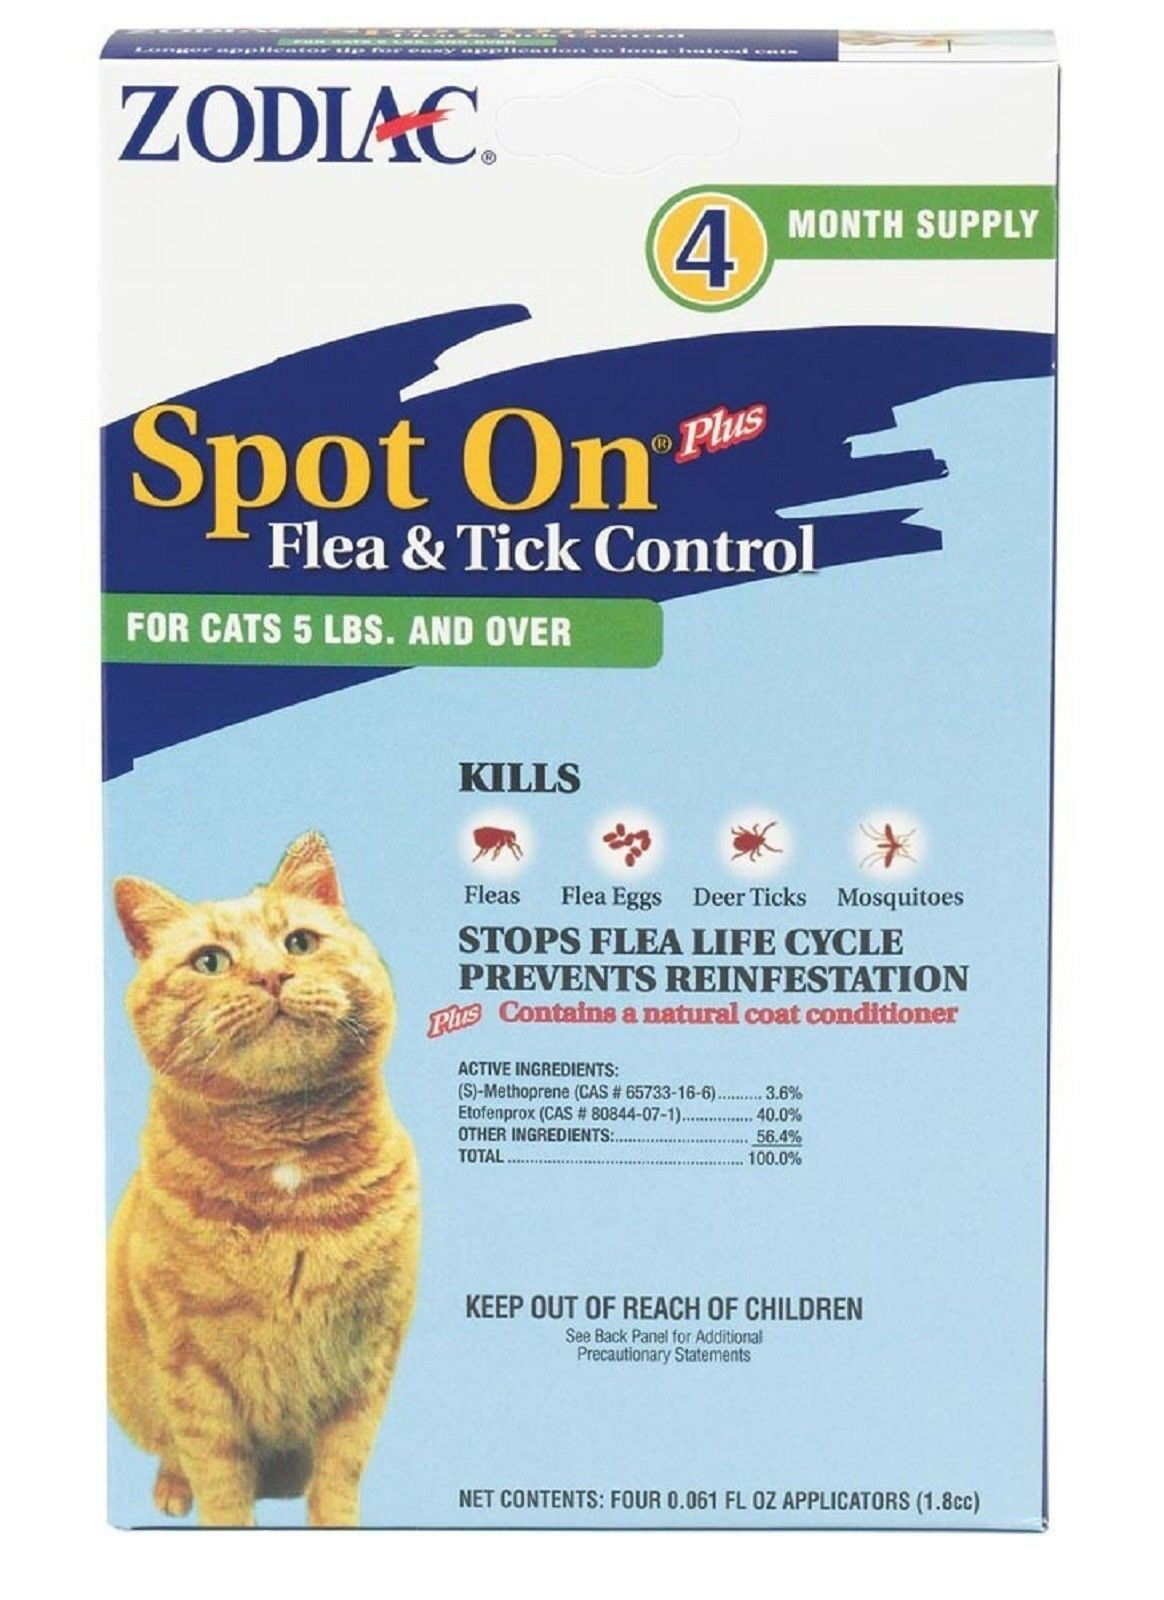 Zodiac Spot On Flea Control For Cats Over 5 Pounds 4 Month